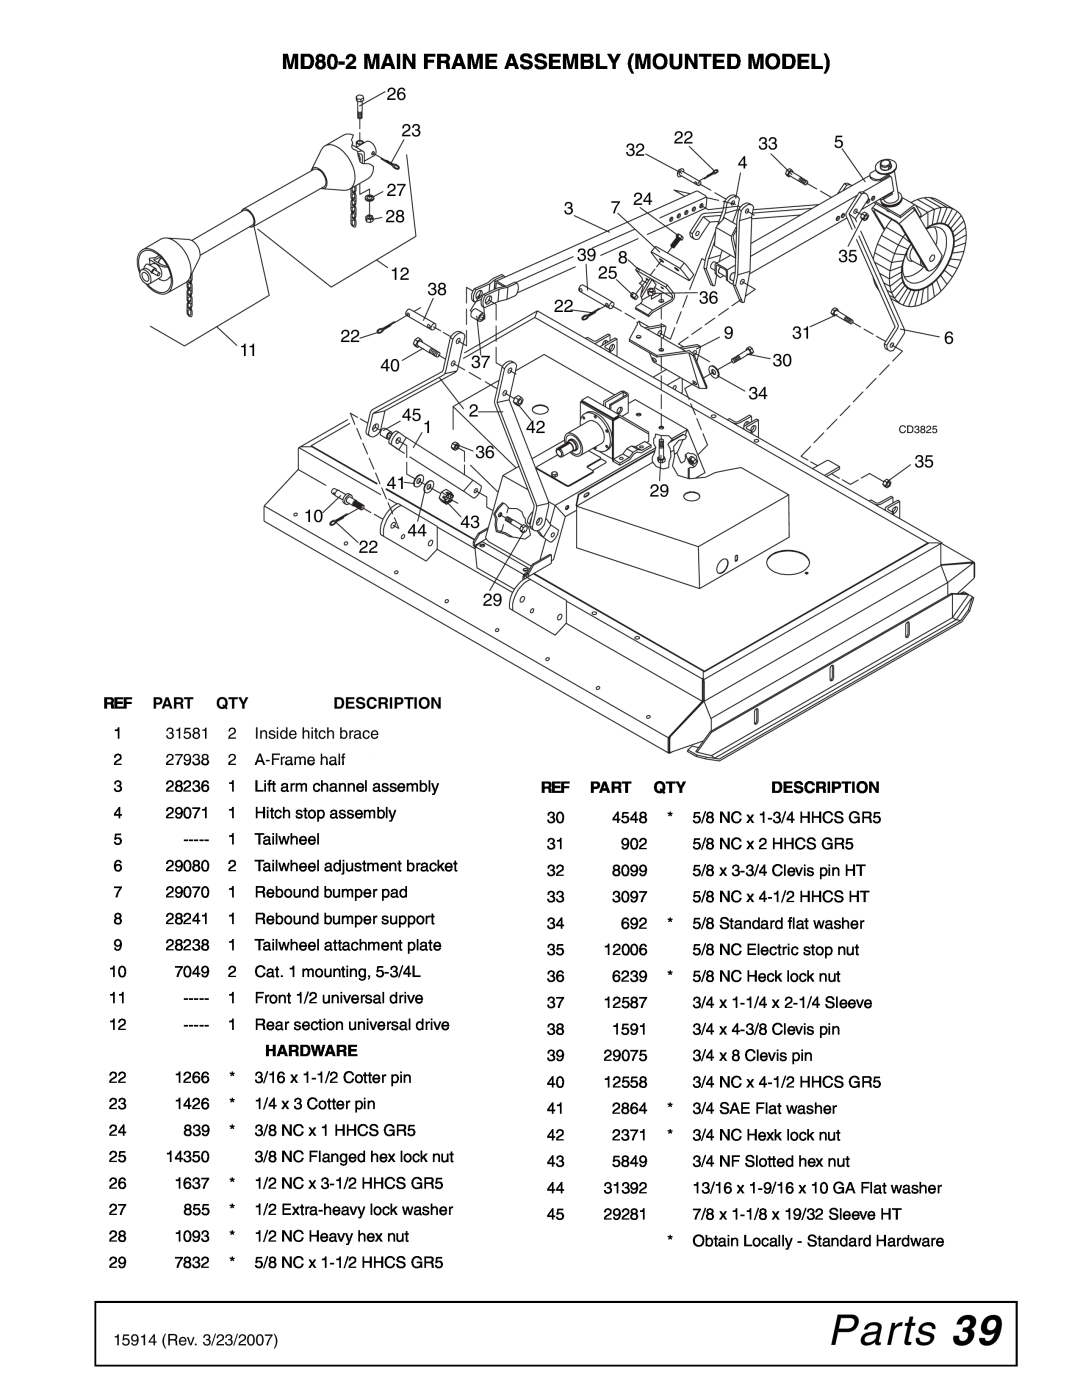 Woods Equipment manual Parts, MD80-2MAIN FRAME ASSEMBLY MOUNTED MODEL 